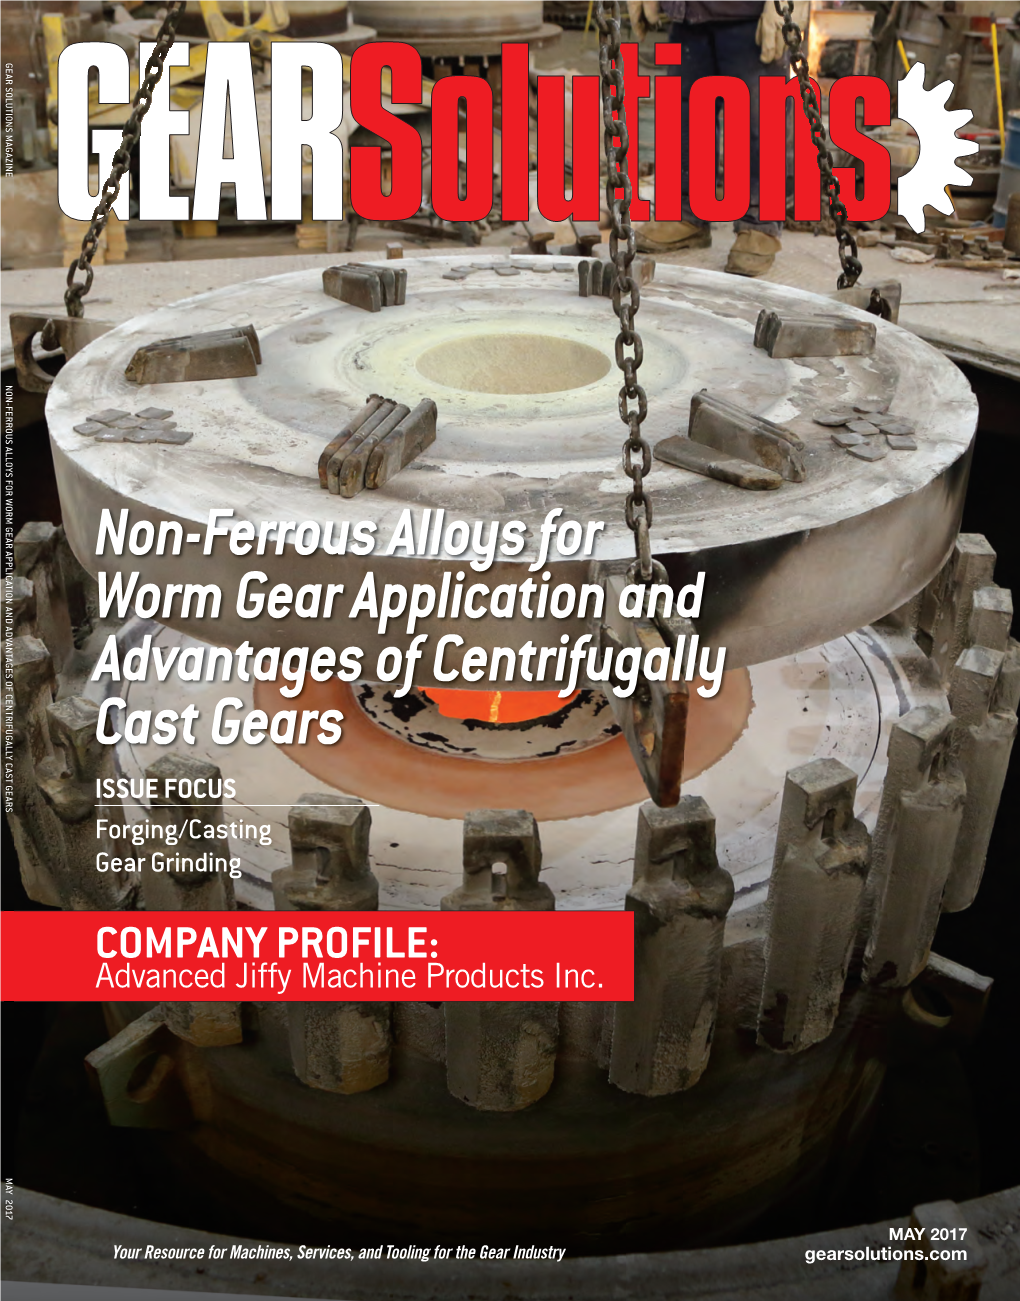 Non-Ferrous Alloys for Worm Gear Application and Advantages of Centrifugally Gears Cast